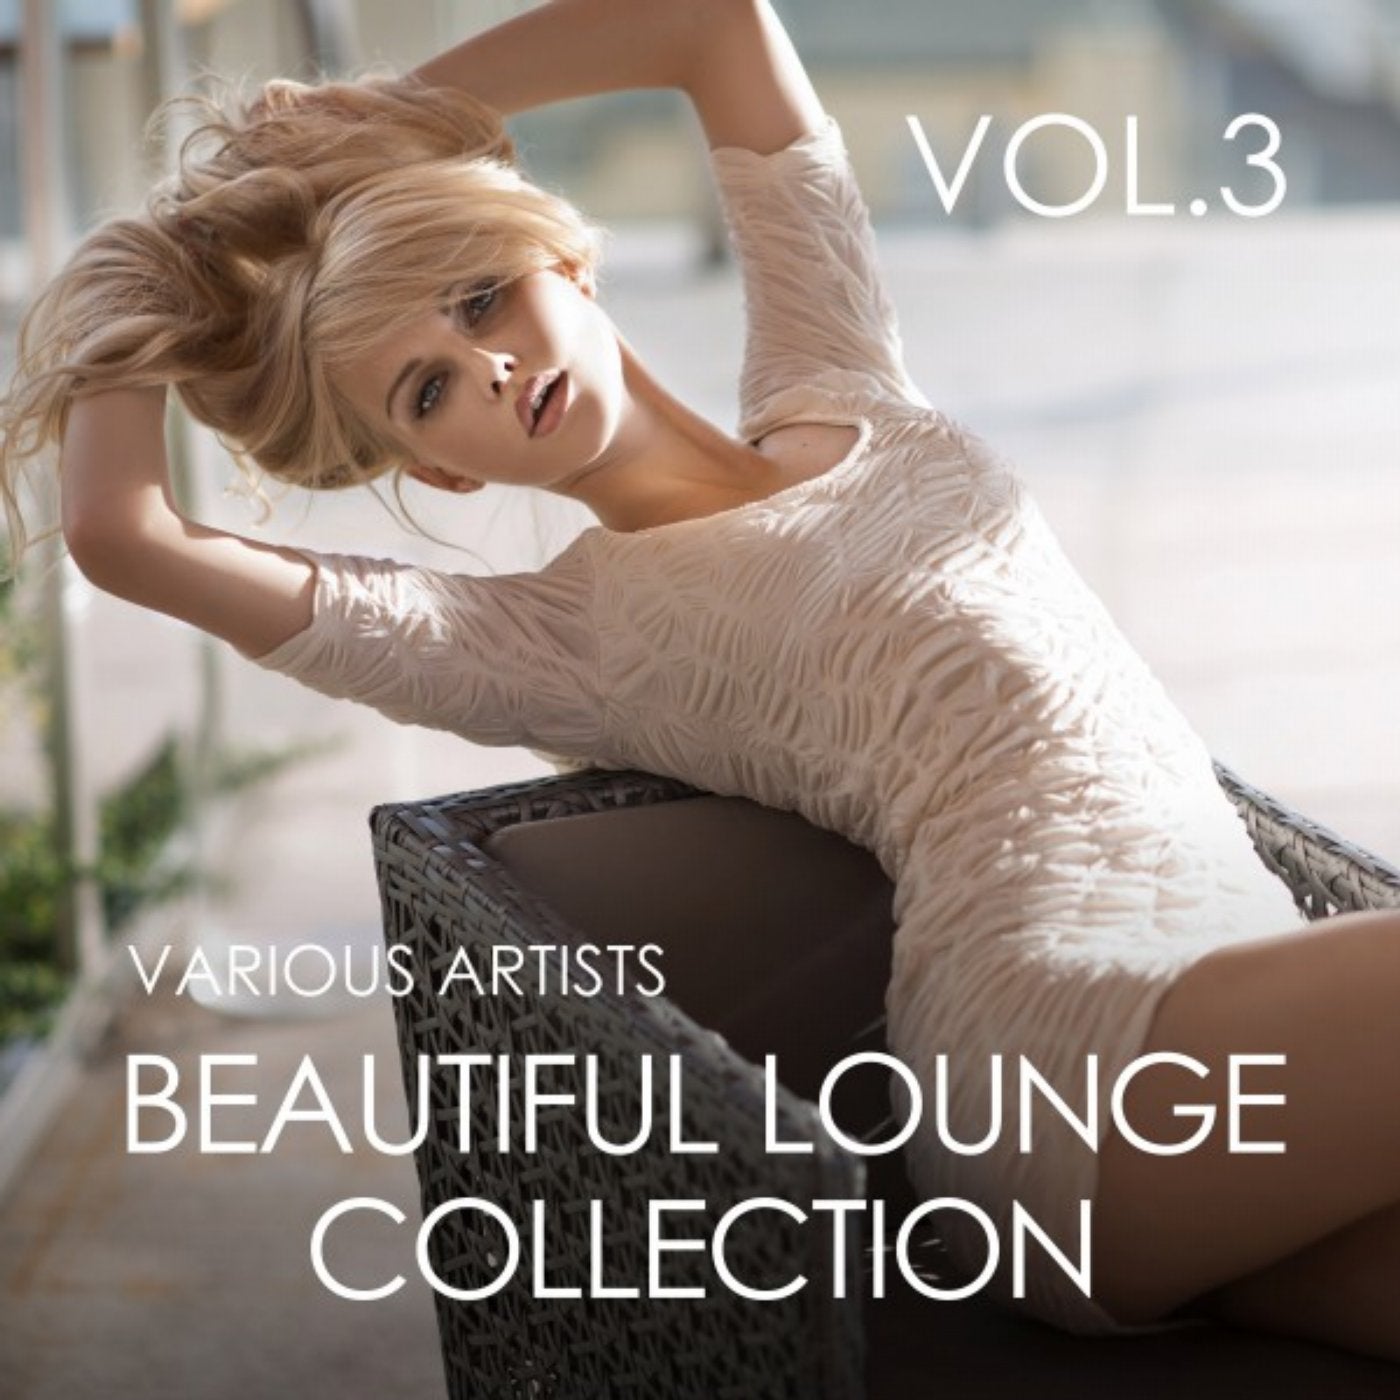 Beautiful Lounge Collection, Vol. 3